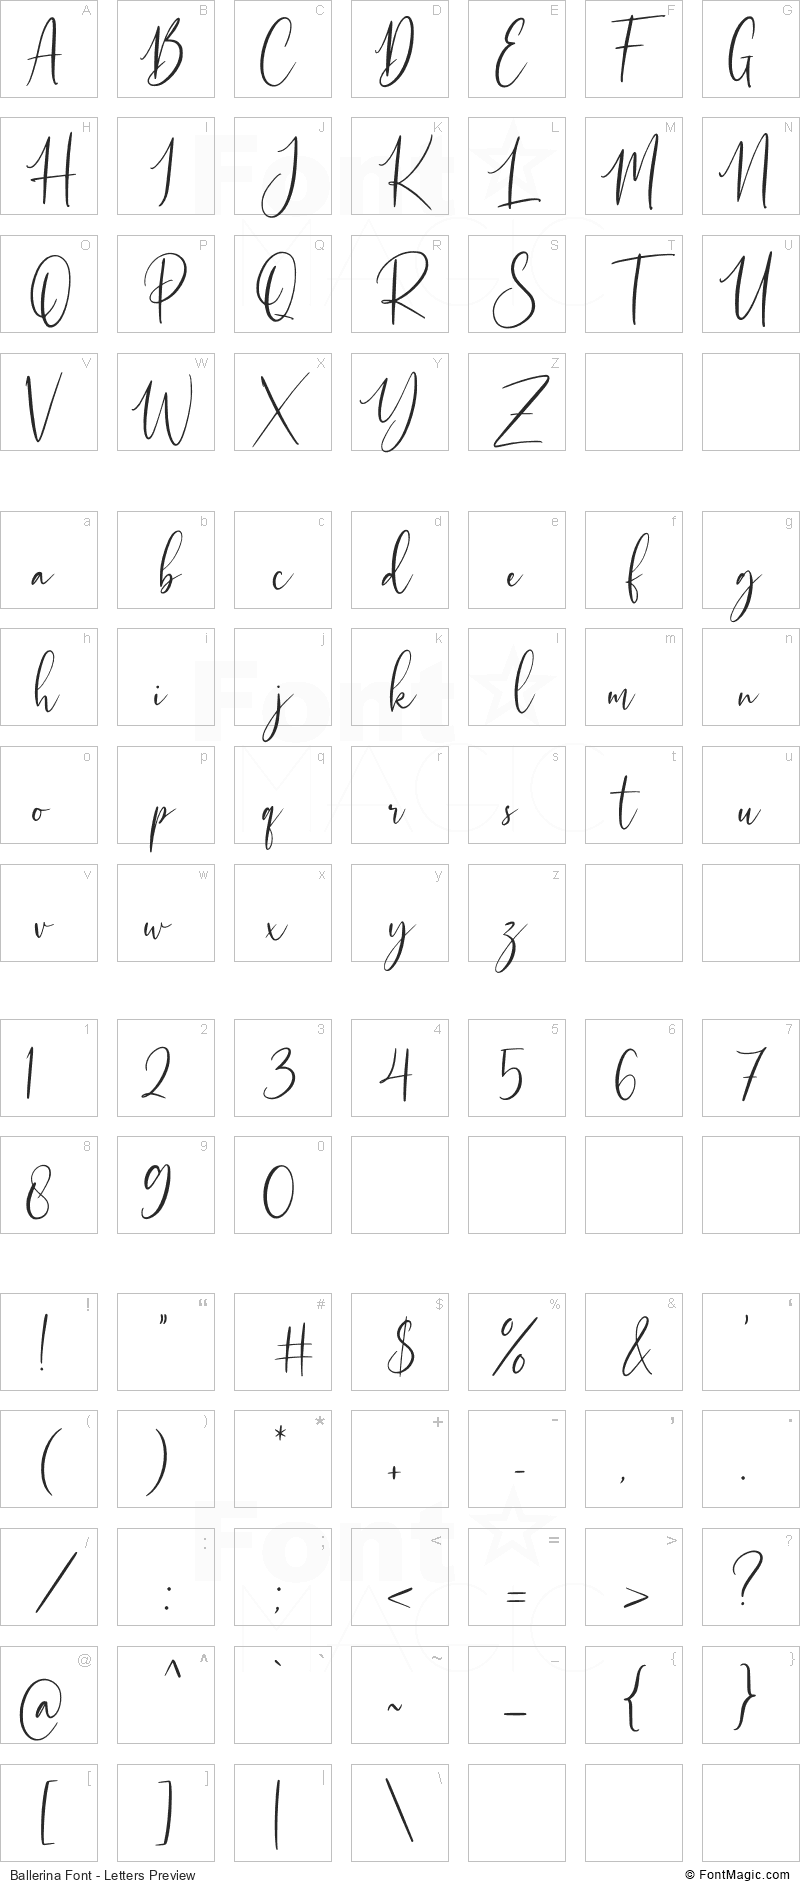 Ballerina Font - All Latters Preview Chart